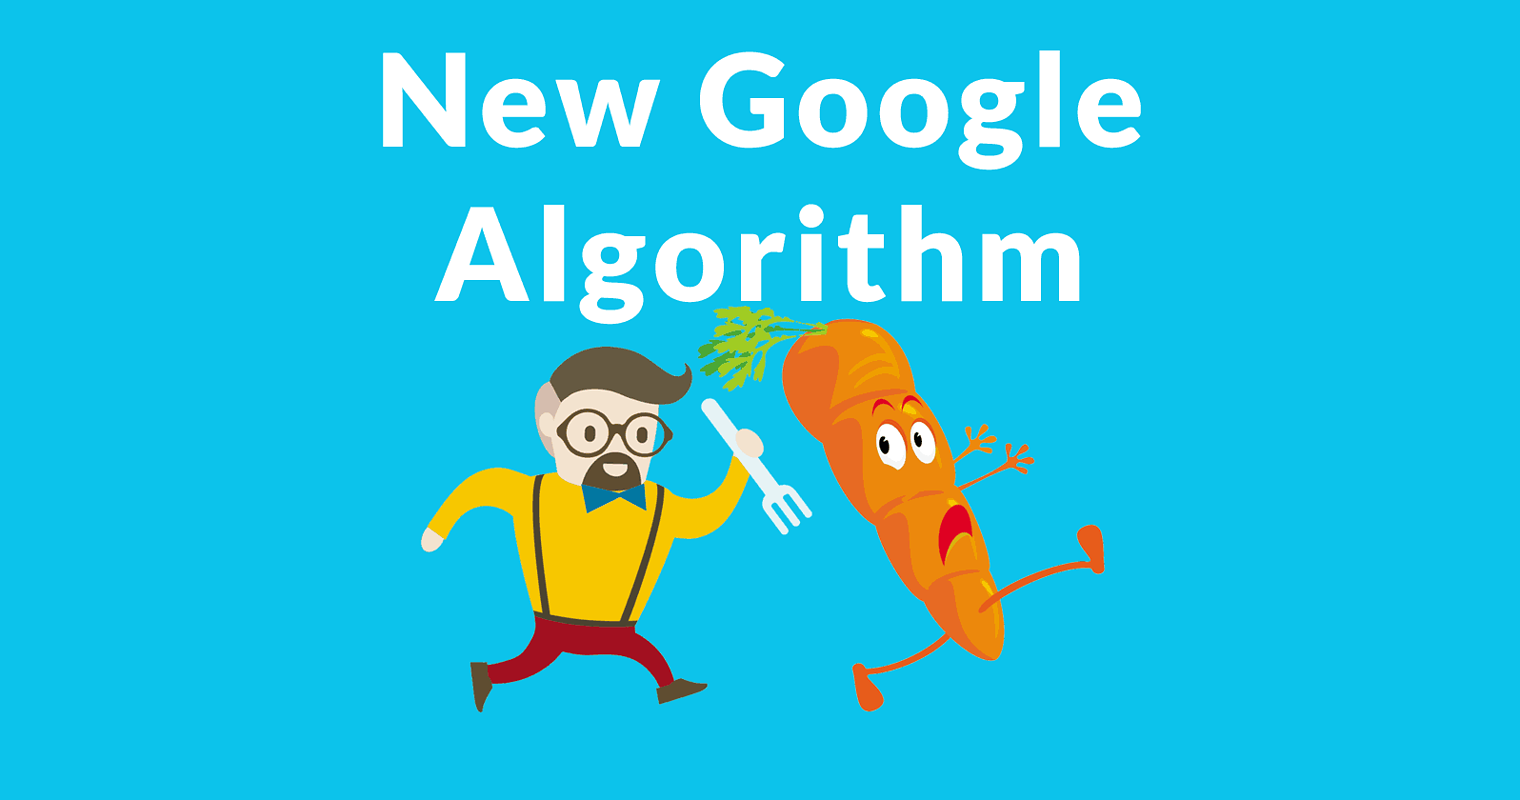 New Google Algorithm May Update Page Ranking